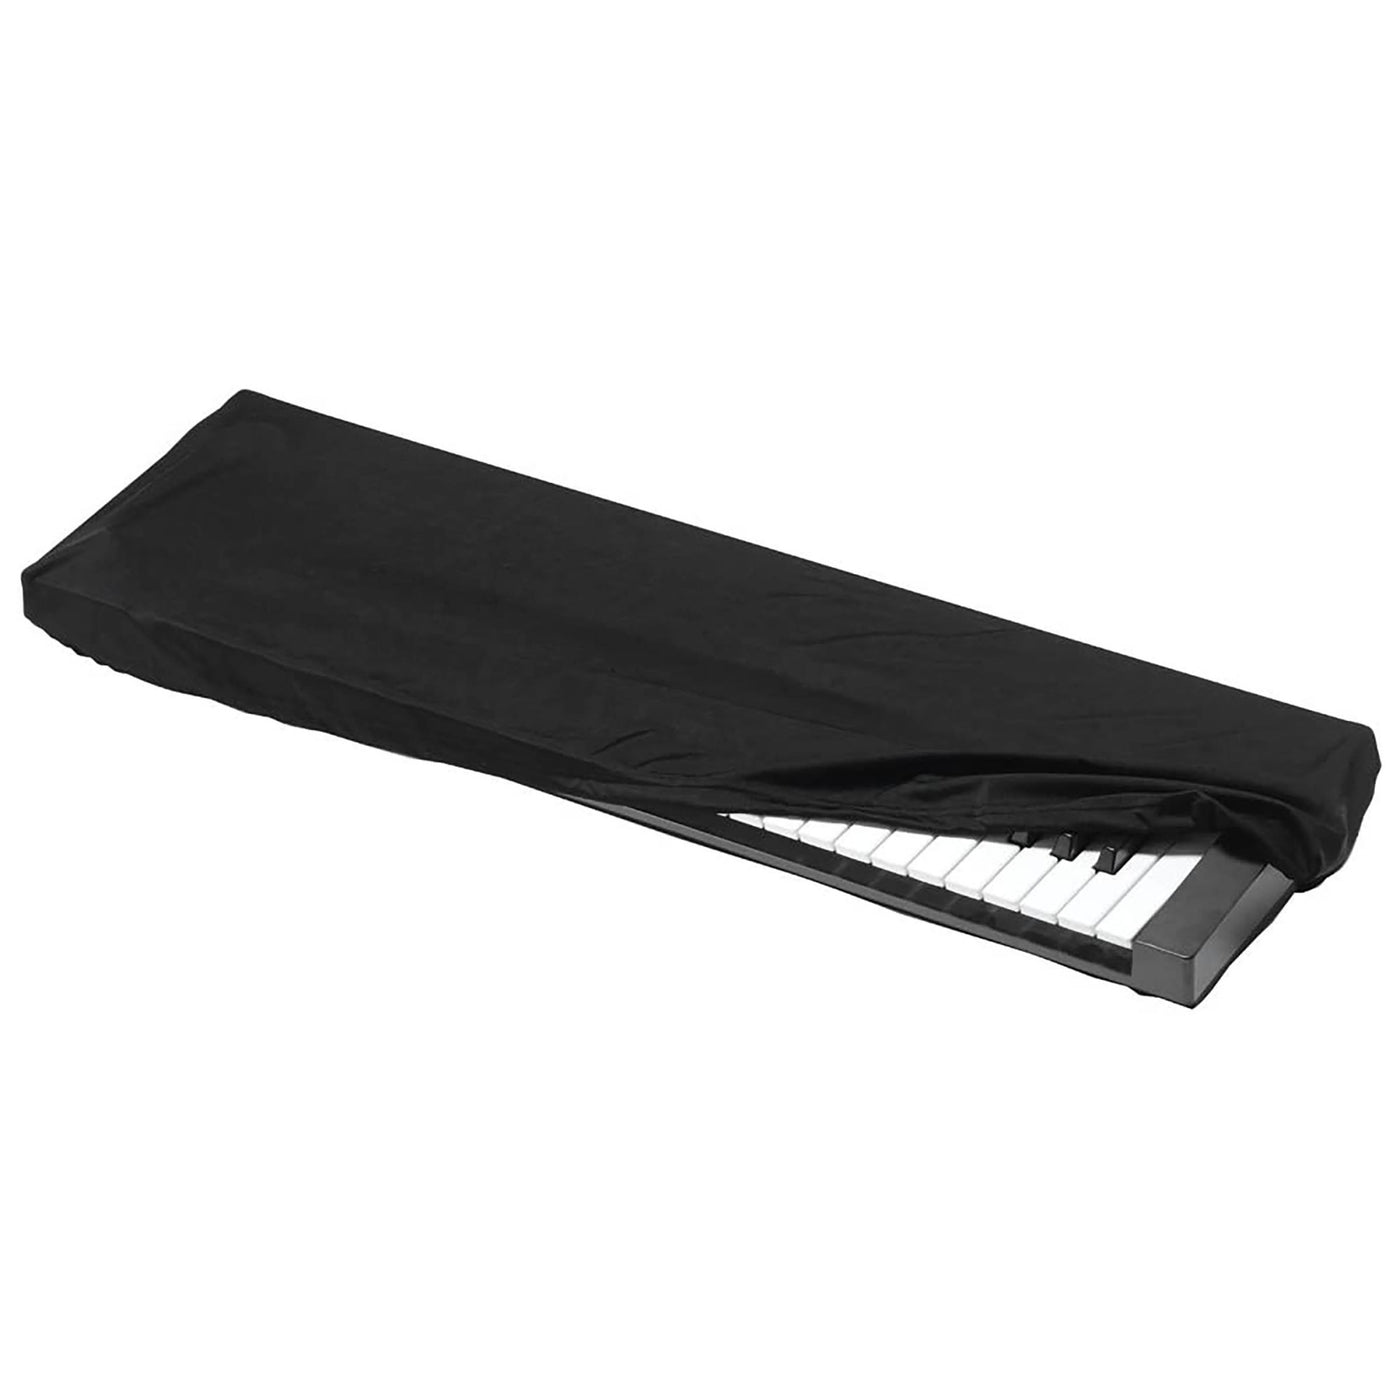 Kaces Keyboard Dust Cover - Large